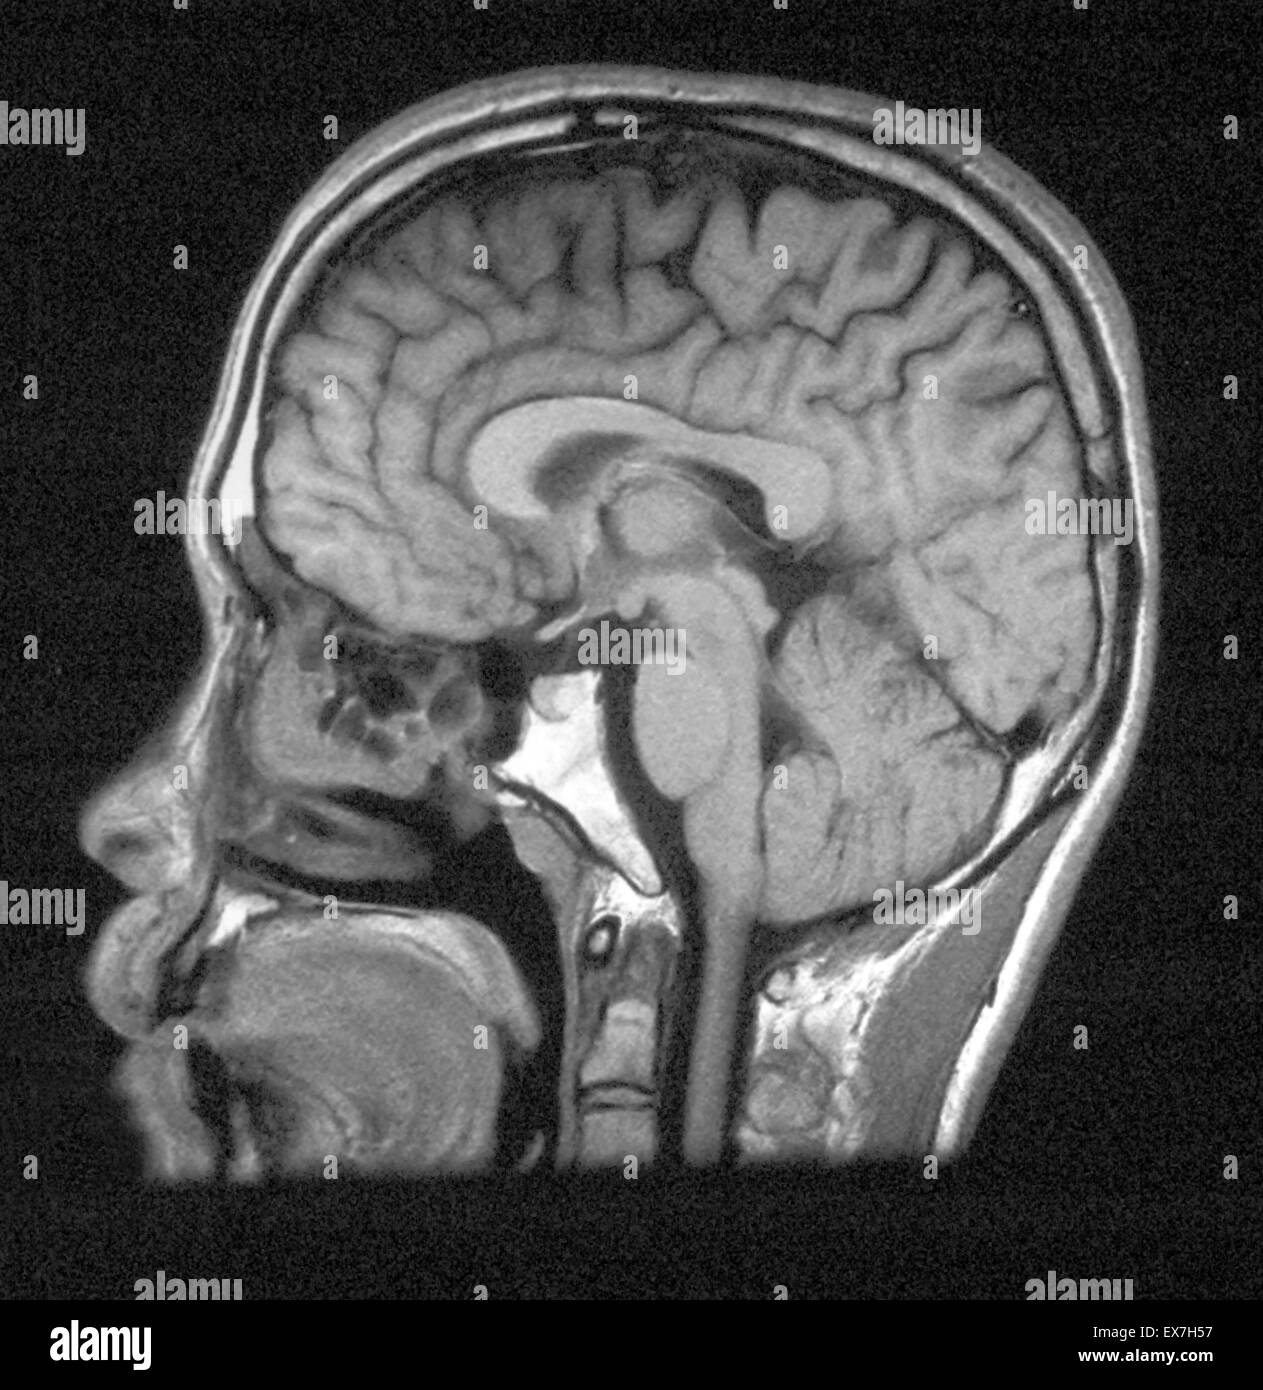 MRI of head showing normal brain structures. Stock Photo